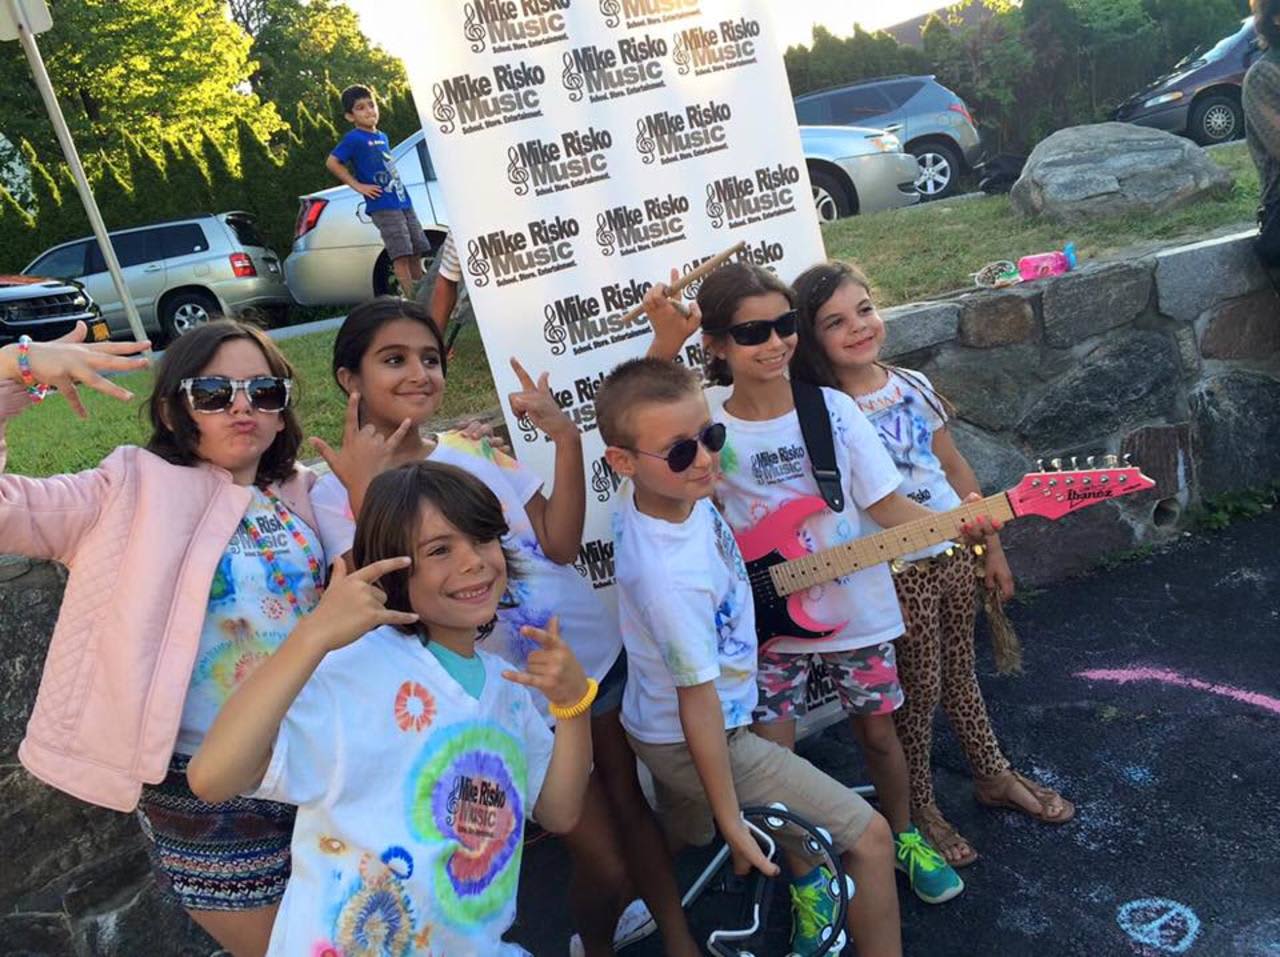 Kids rock out at Mike Risko Music School's Rock Band Camp.